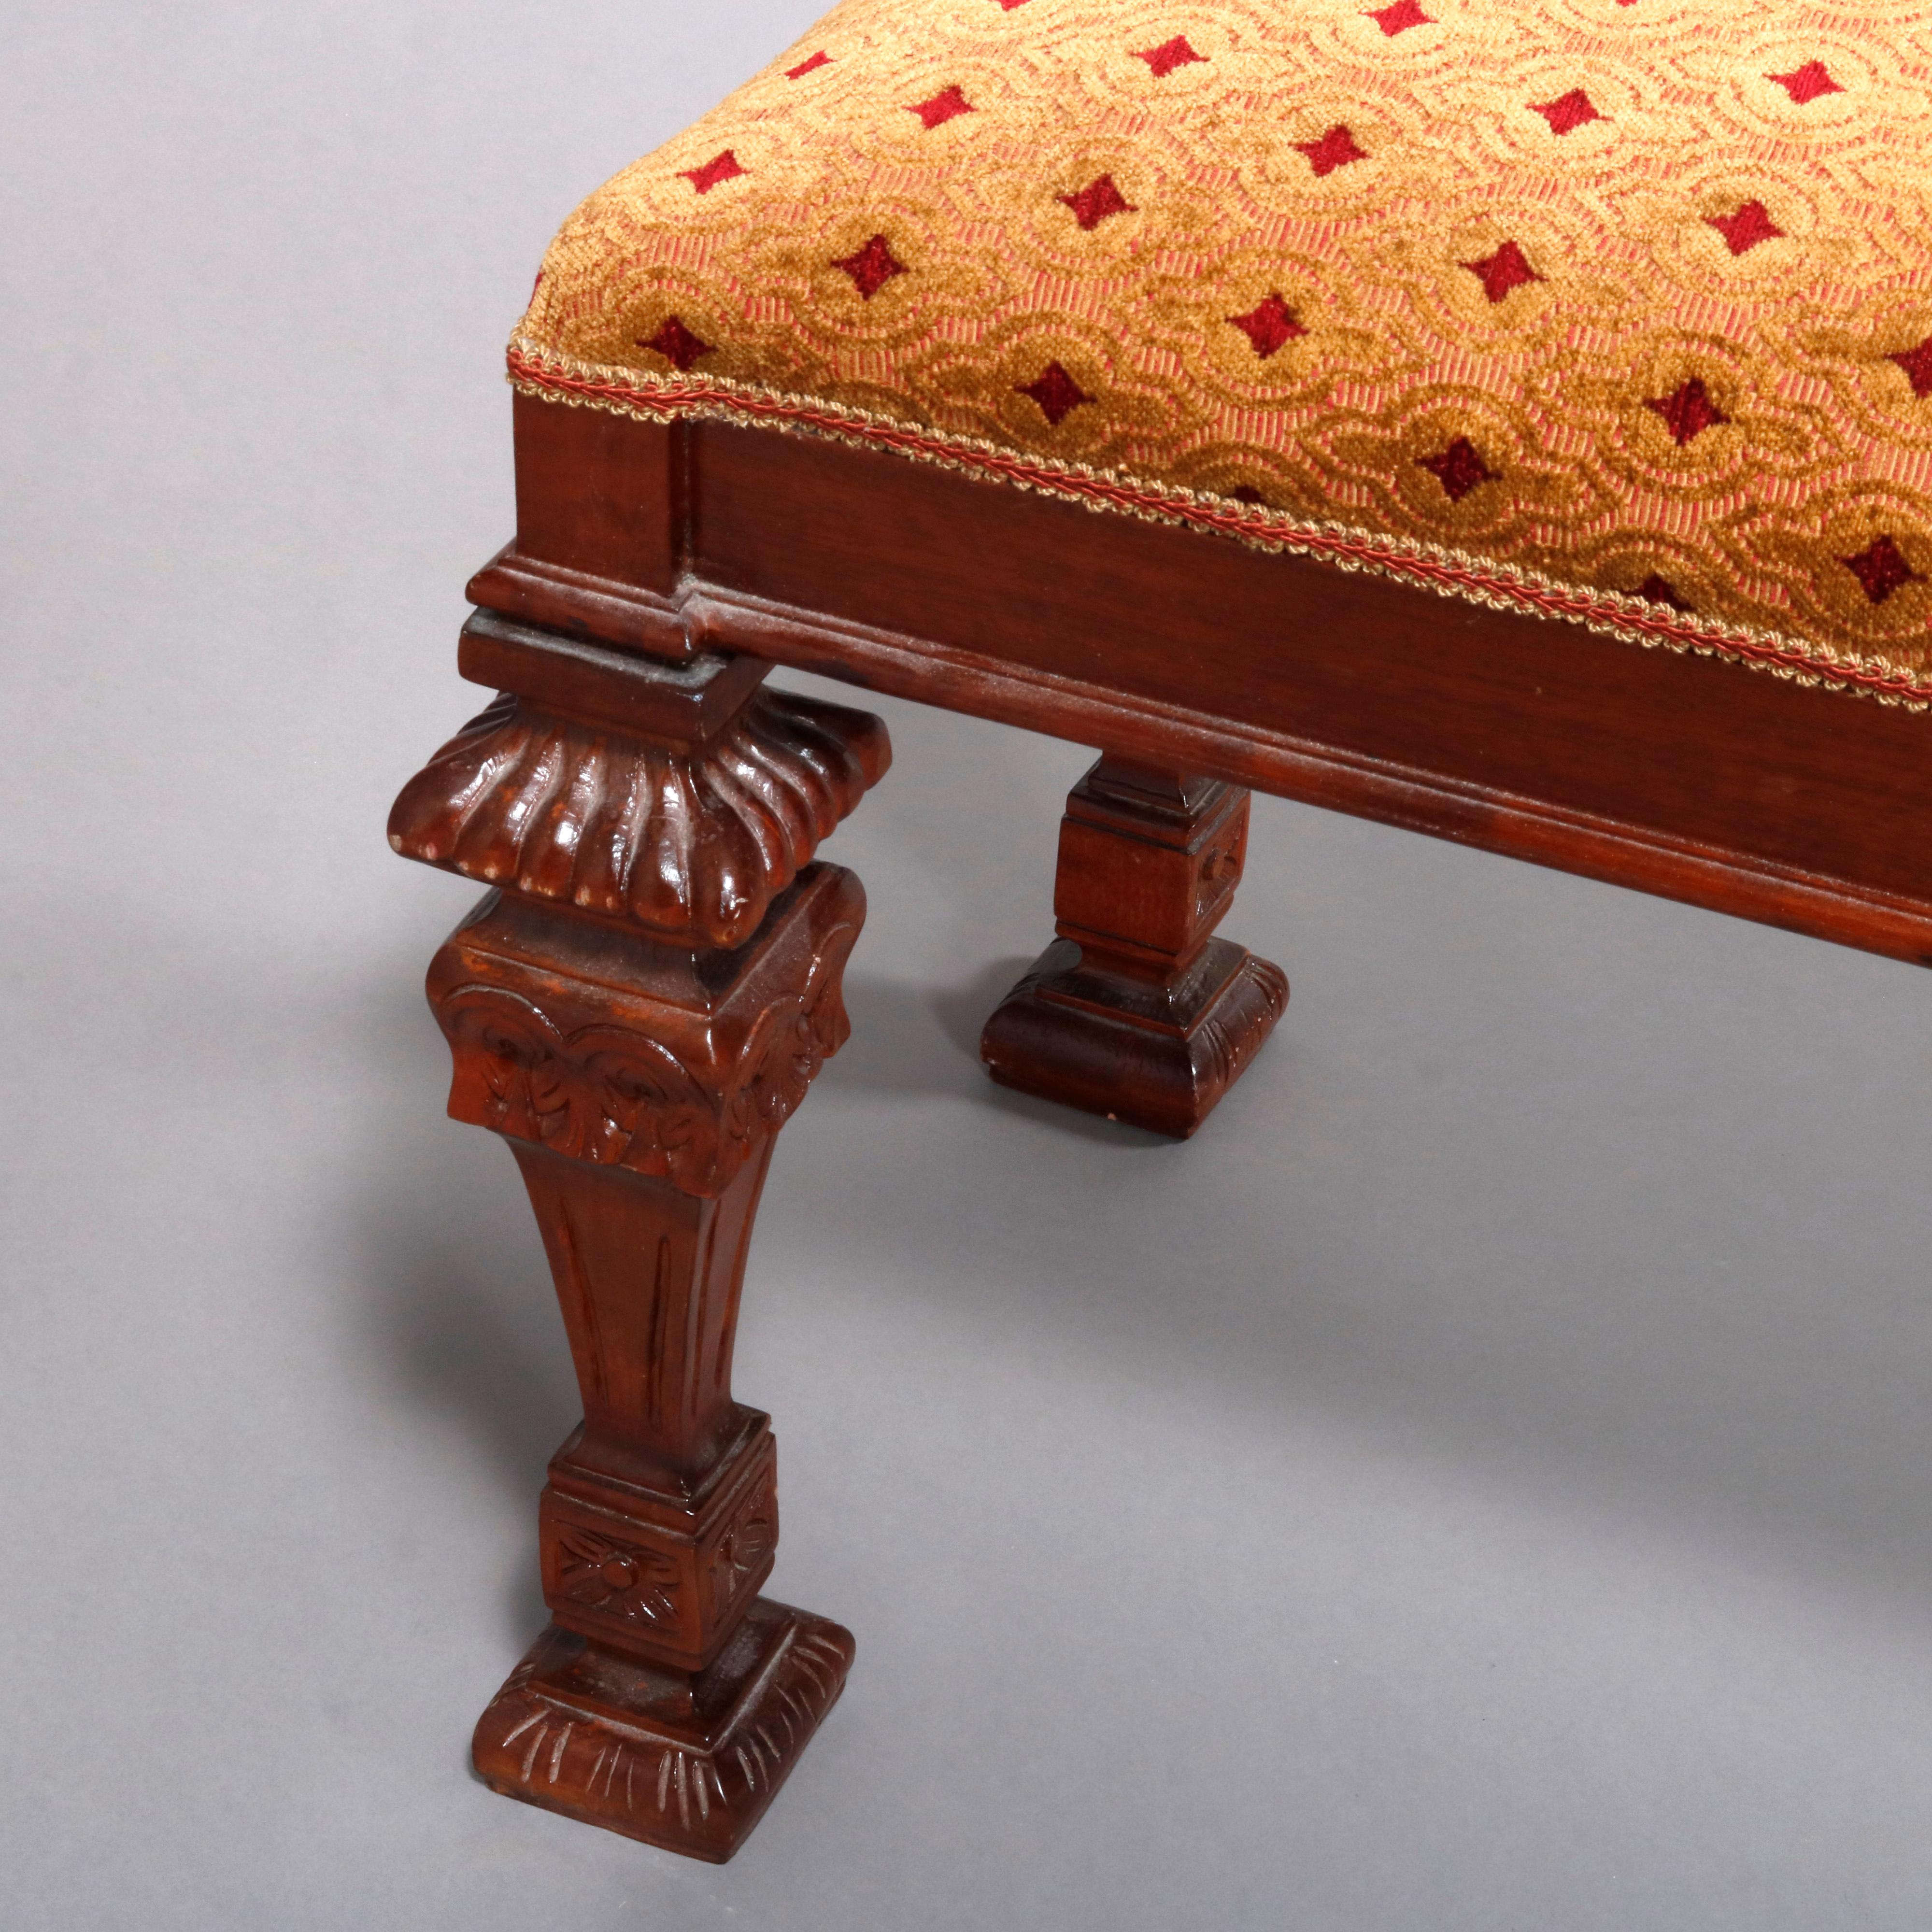 A vintage continental long bench offers upholstered seat surmounting carved mahogany frame with square and tapered legs having gadroon and floral decoration, 20th century

Measures: 21.5